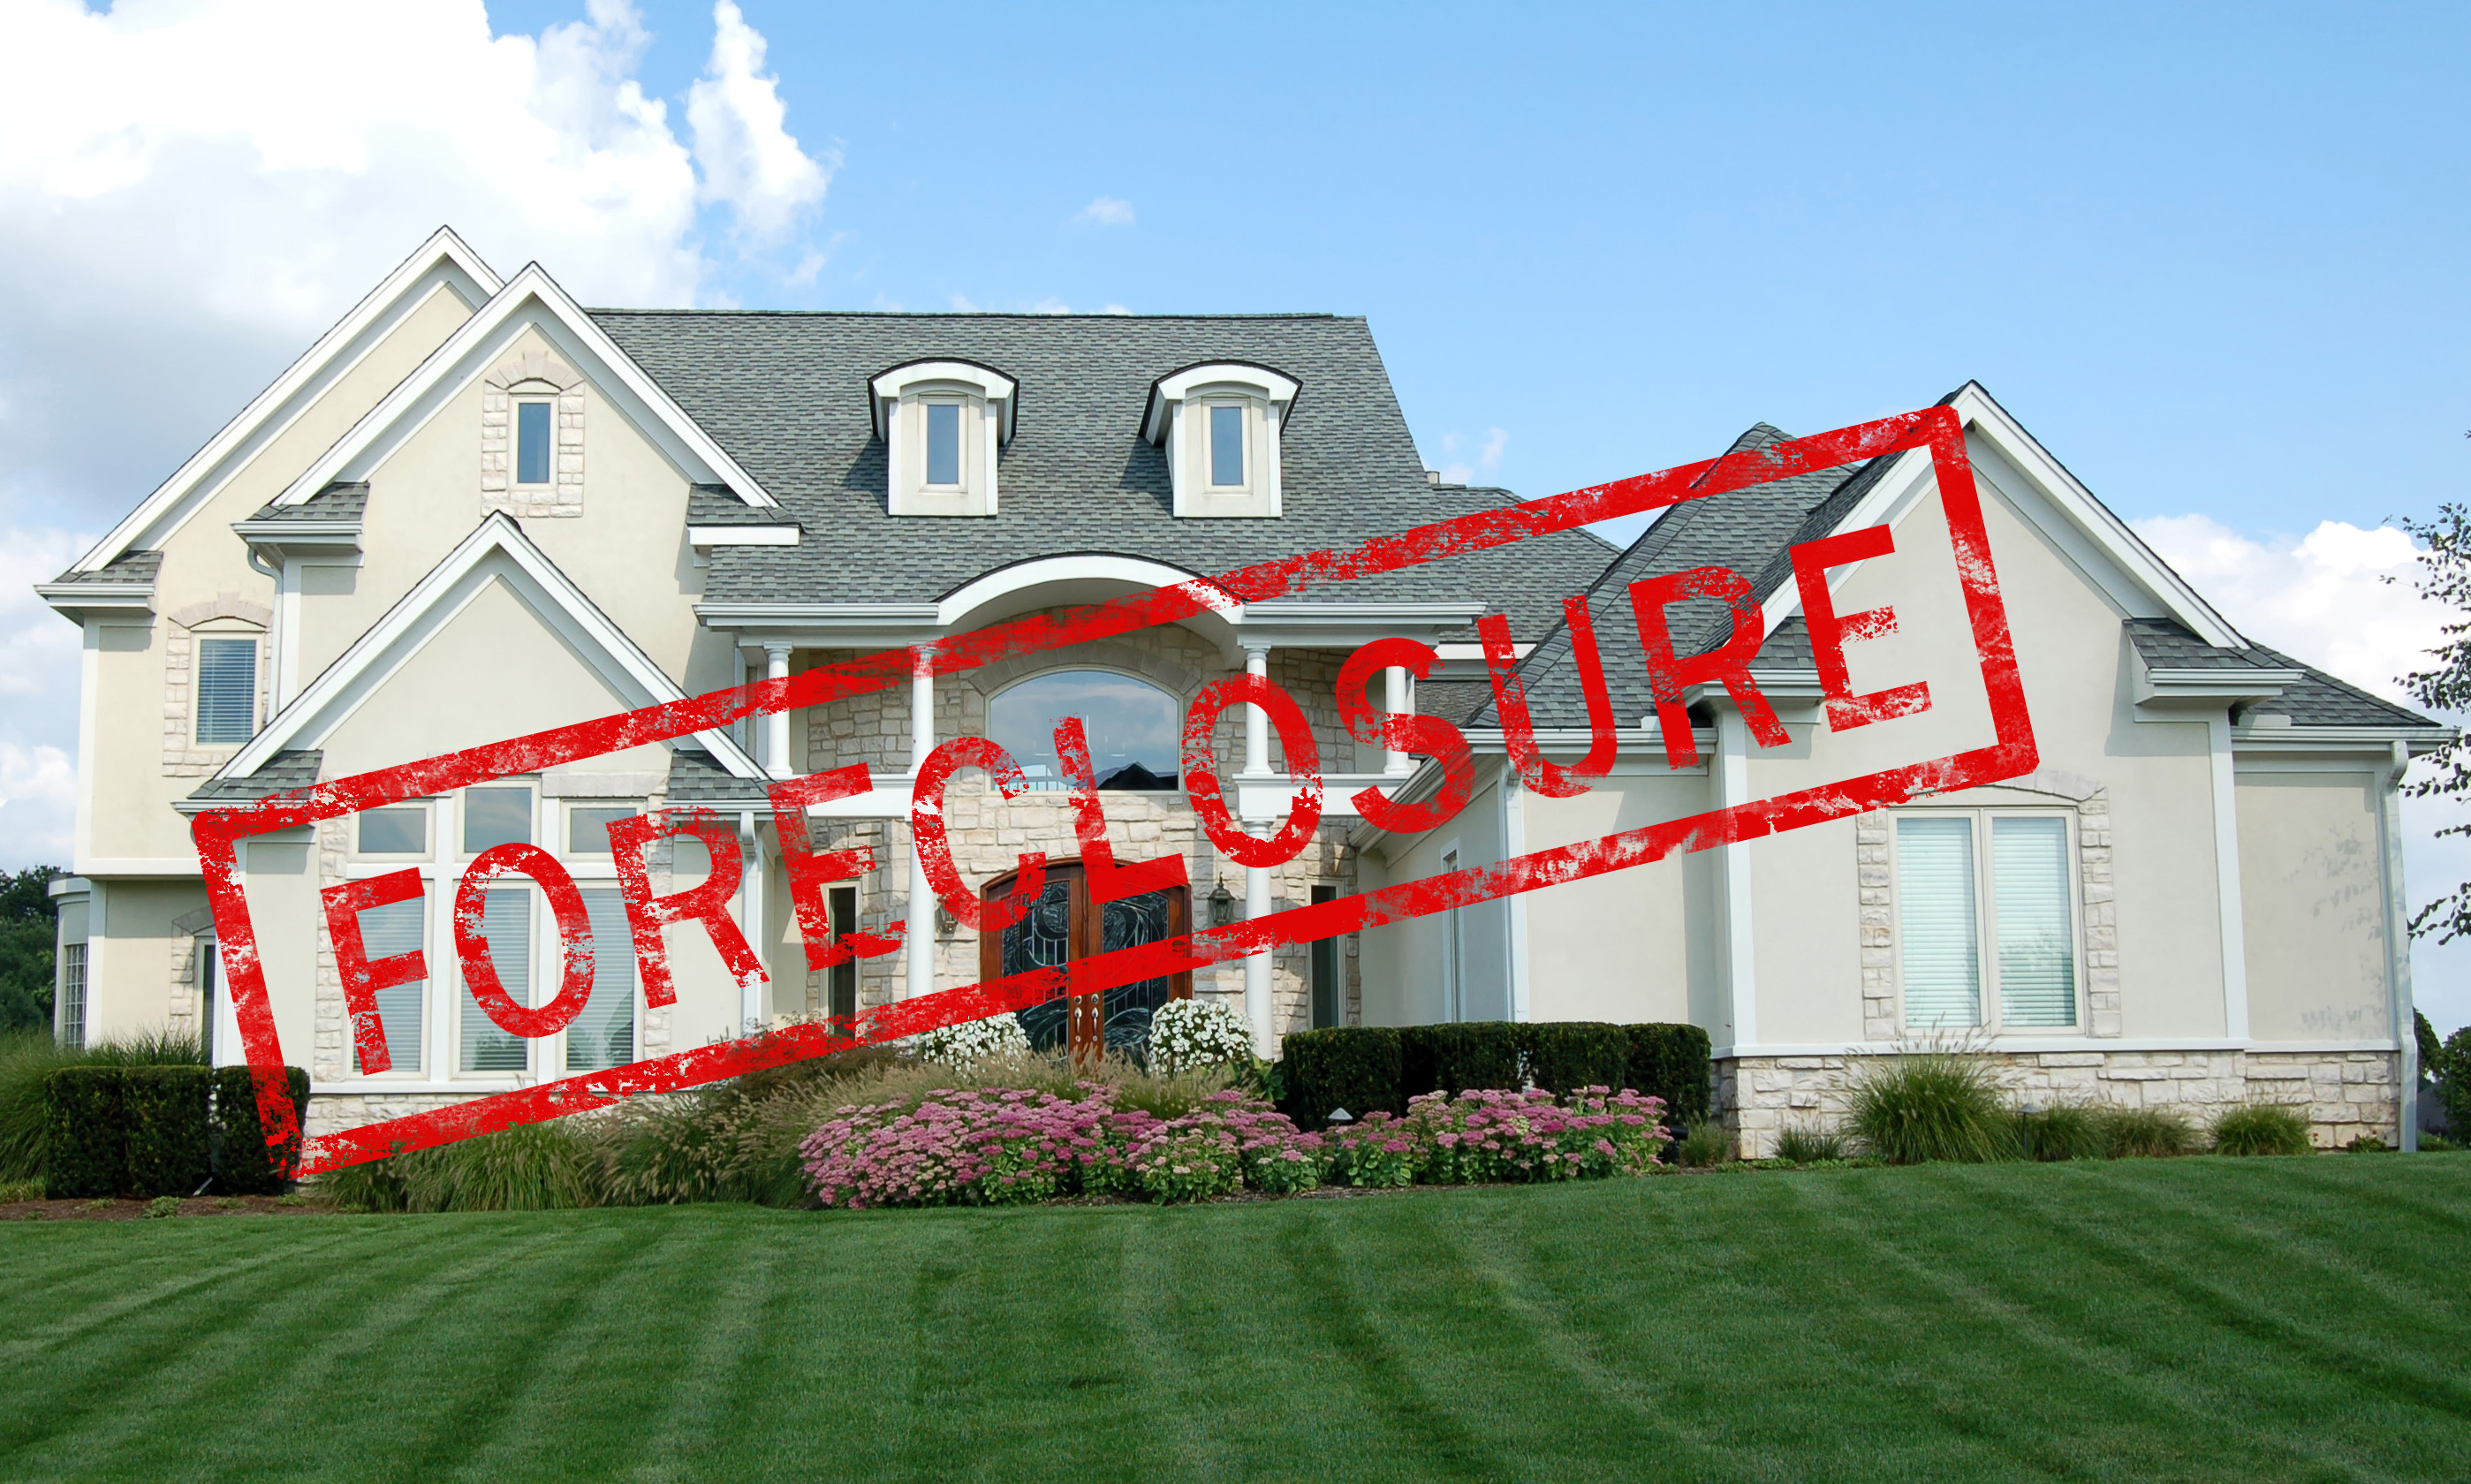 Call Larry Jr Appraisals when you need appraisals on Tom Green foreclosures